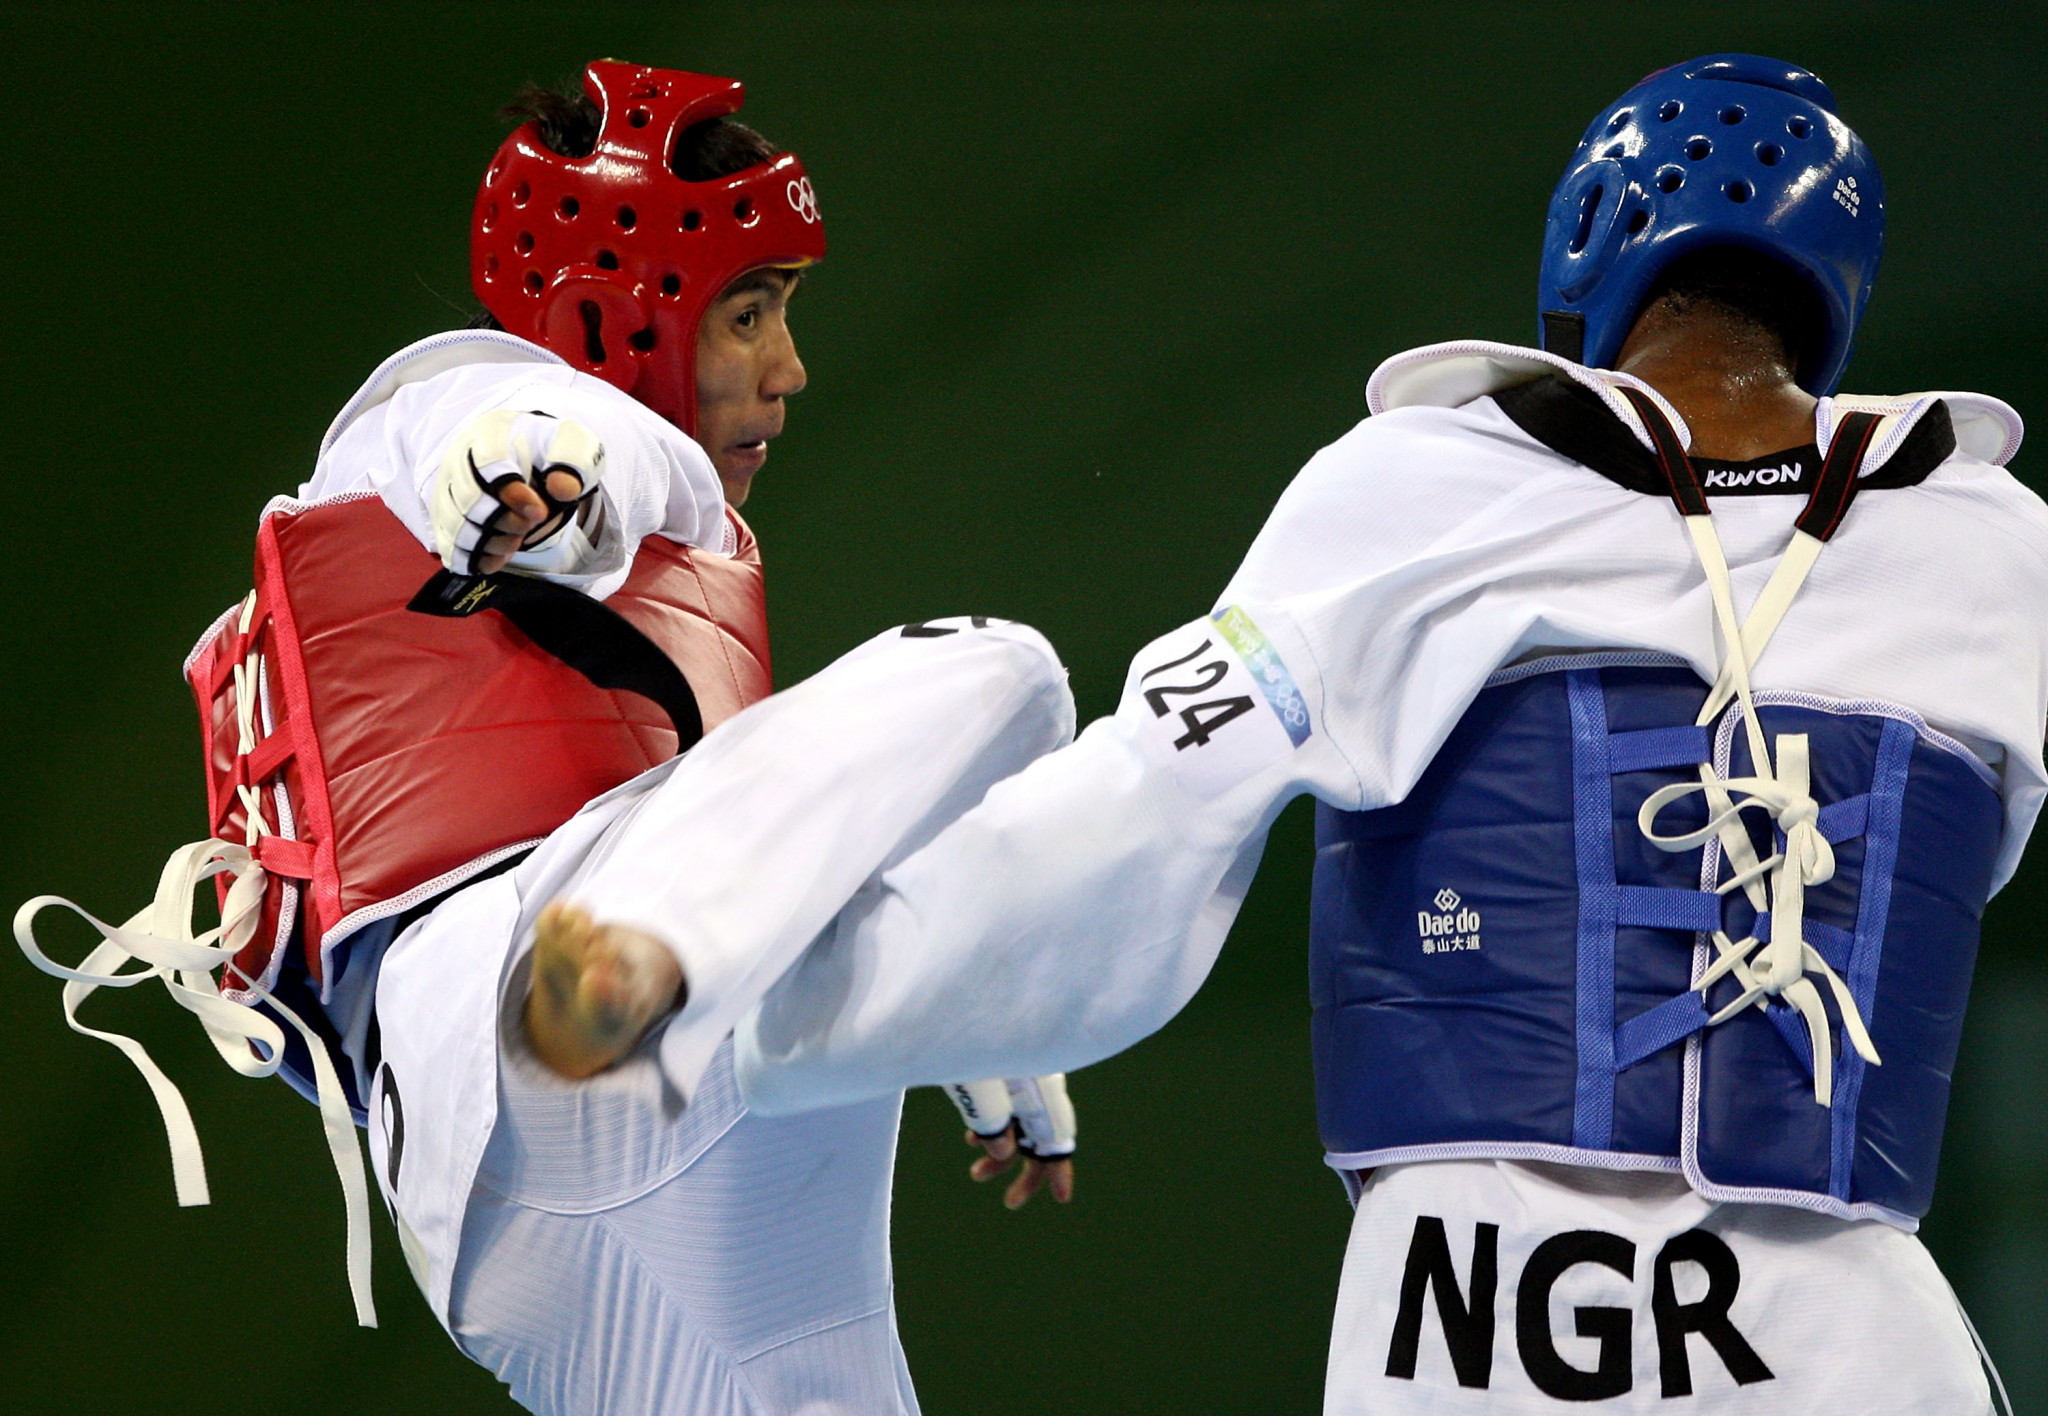 Nigerian taekwondo coach calls for more support to aid preparations for African Championships